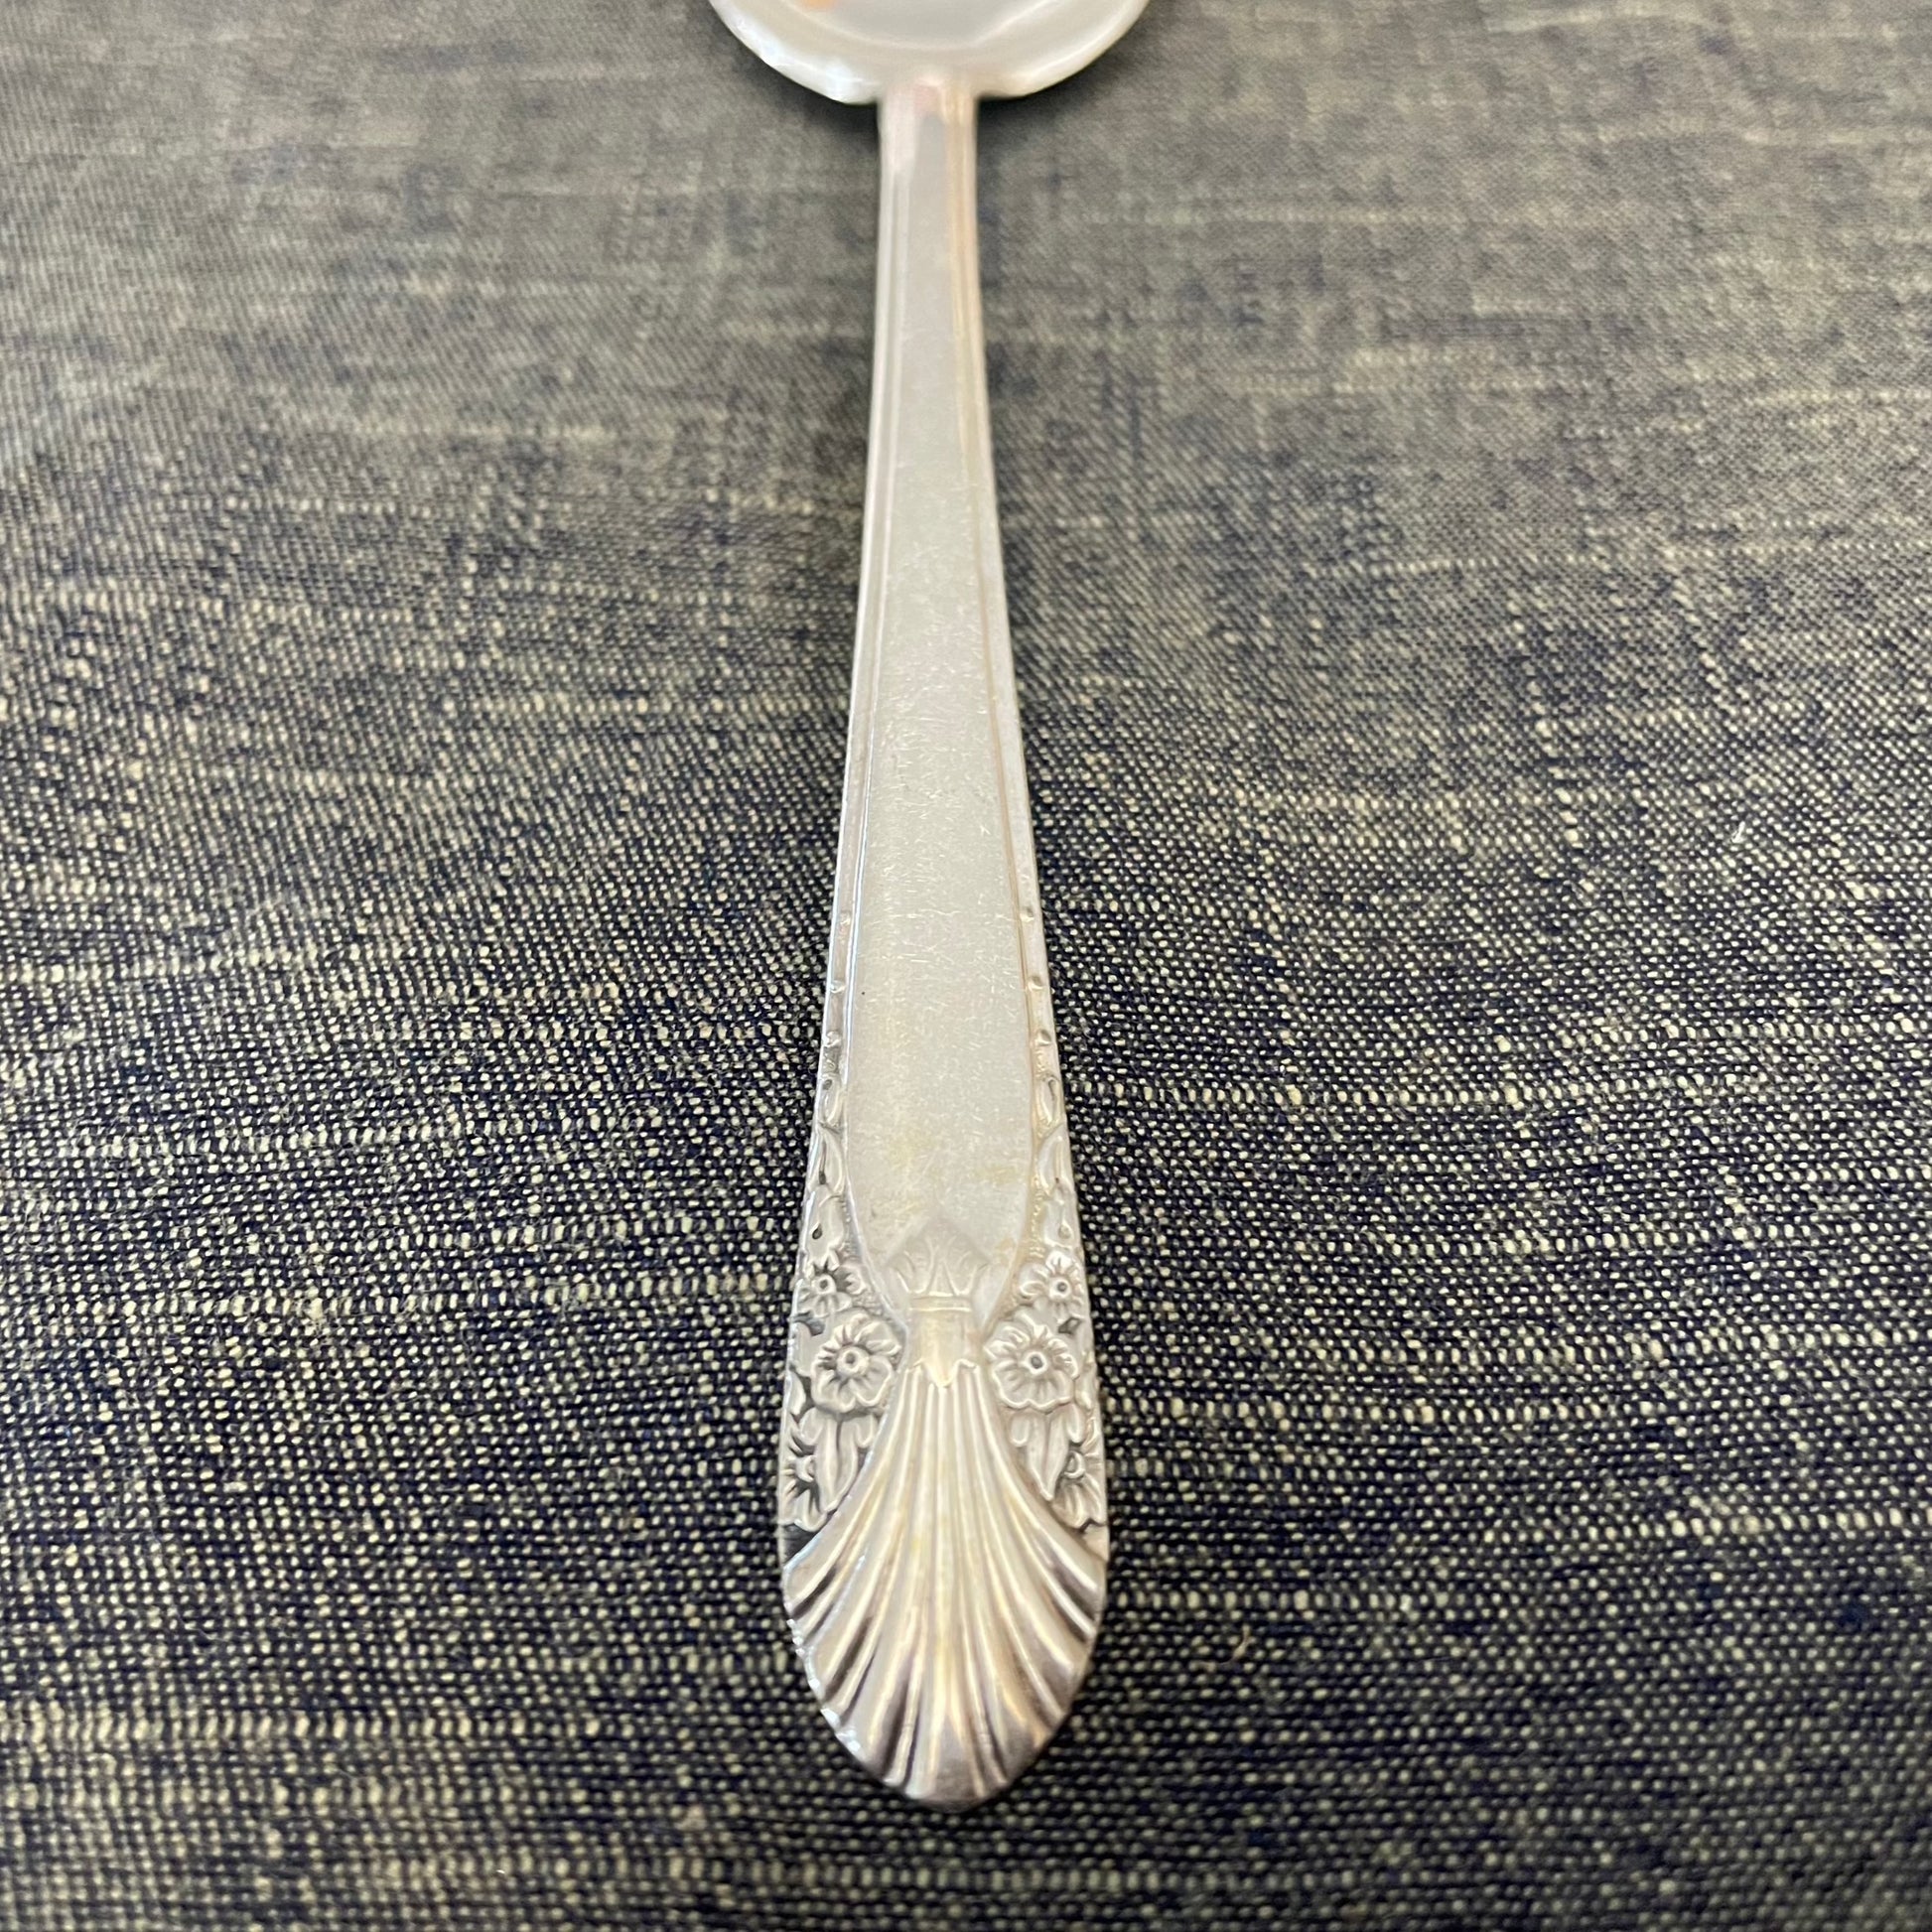 antique silver plate spoon